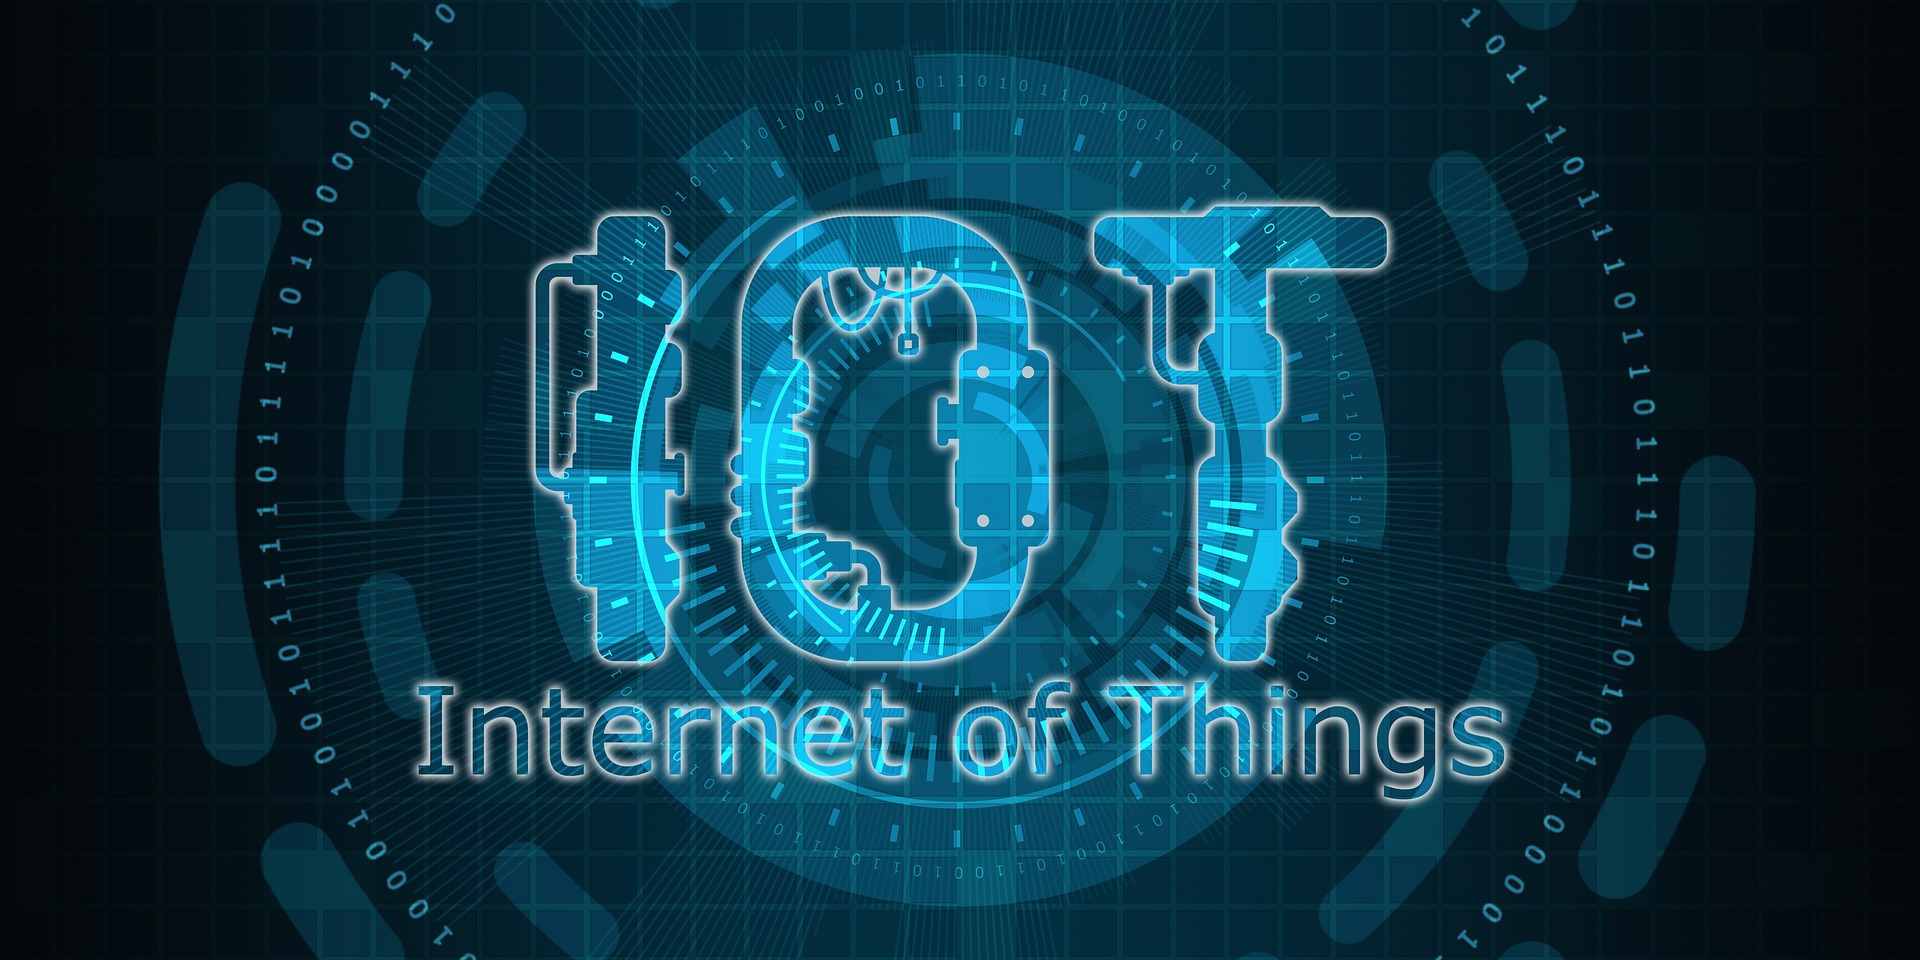 Adapt to New IoT Requirements by Partnering with Competent Internet of Things Companies